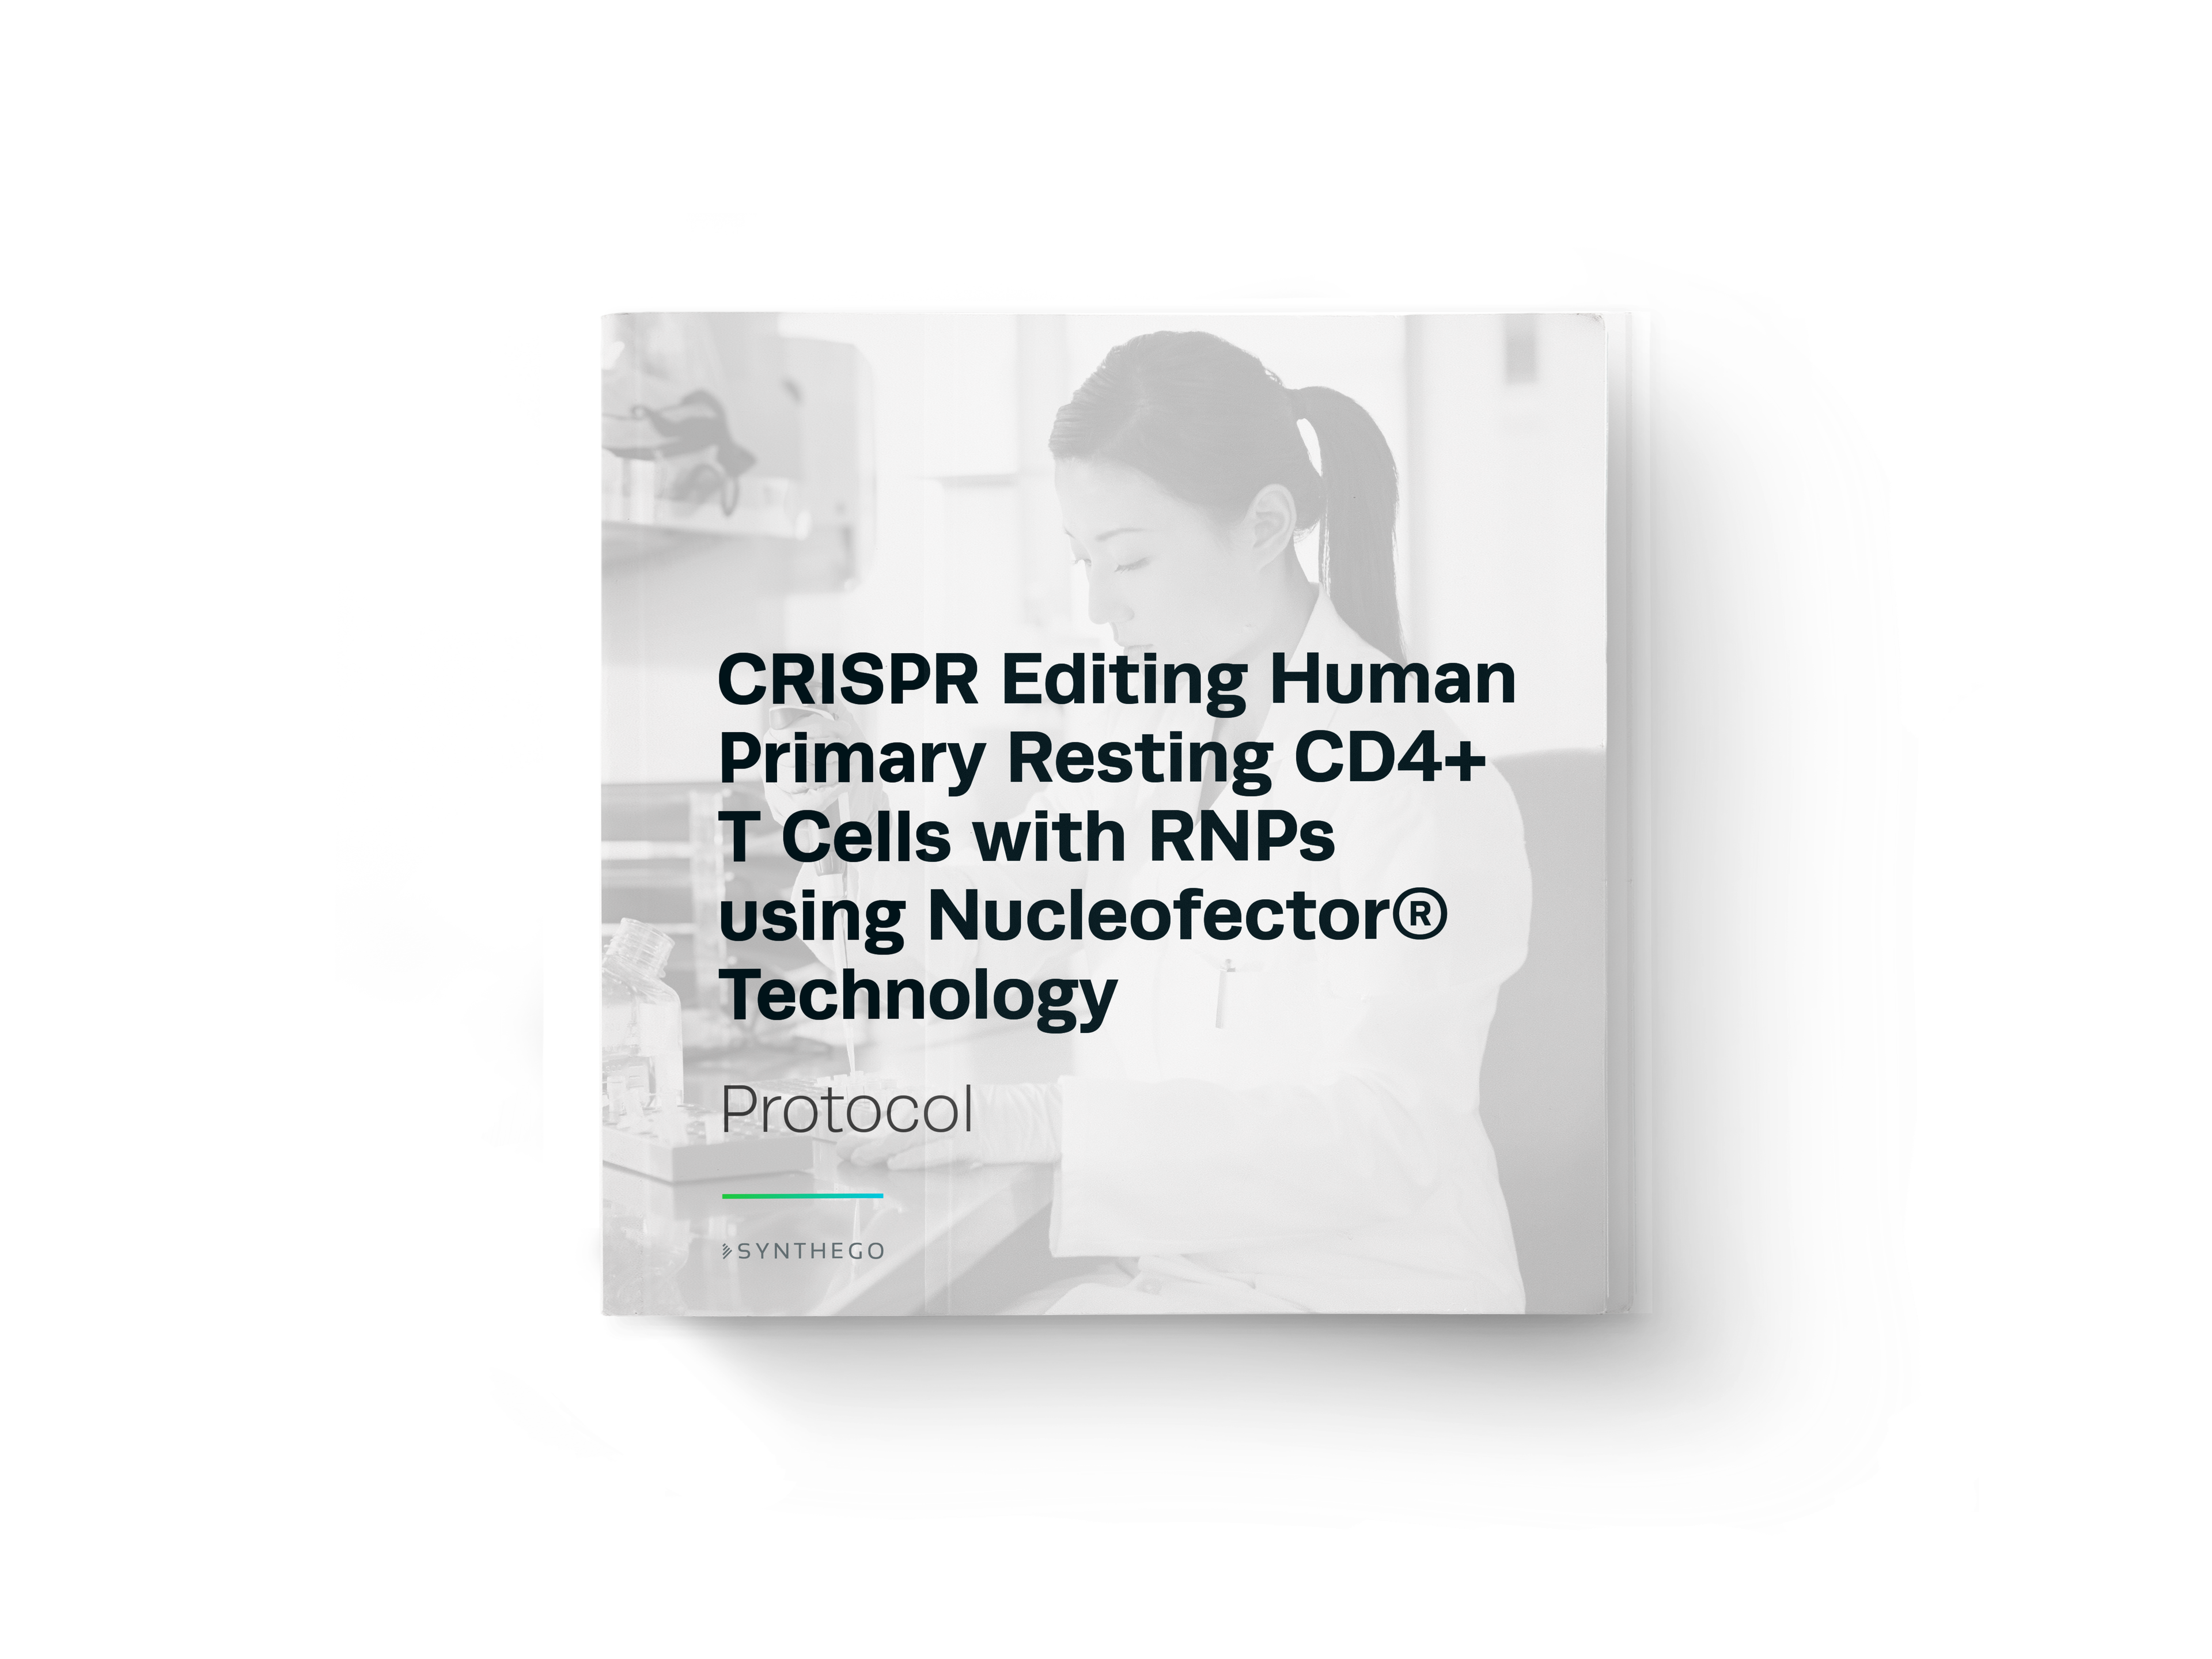 CRISPR Editing Human Primary Resting CD4+ T Cells with RNPs using Nucleofector® Technology